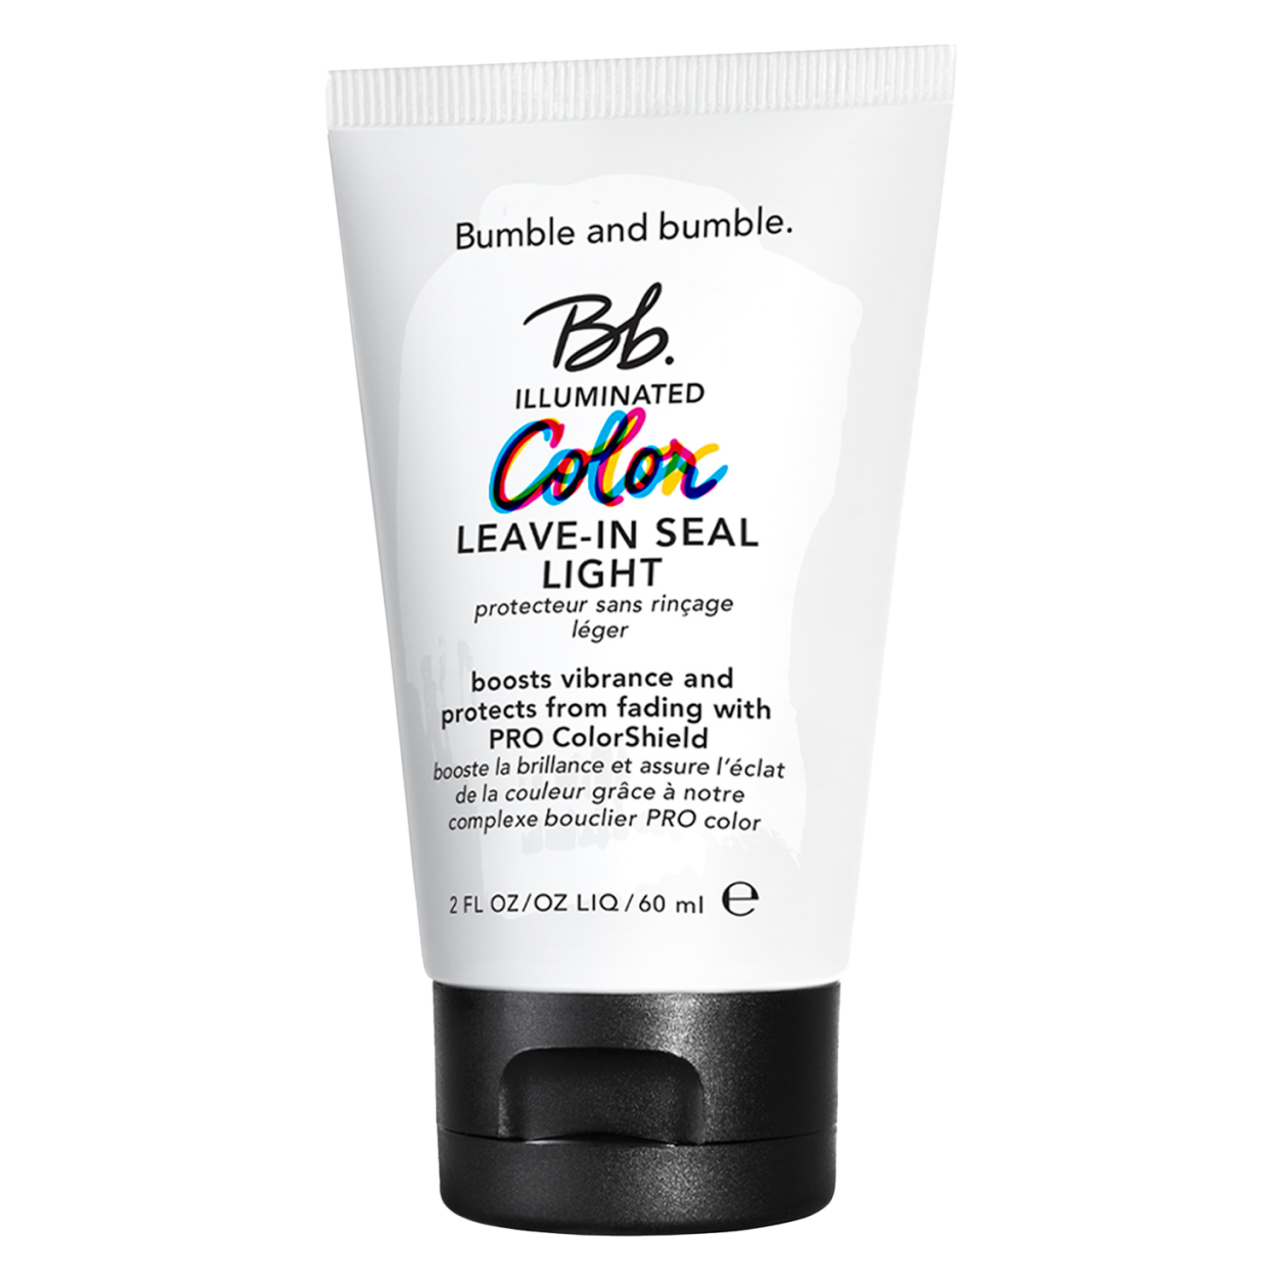 Bb. Color - Illuminated Color Leave-In Seal Light von Bumble and bumble.